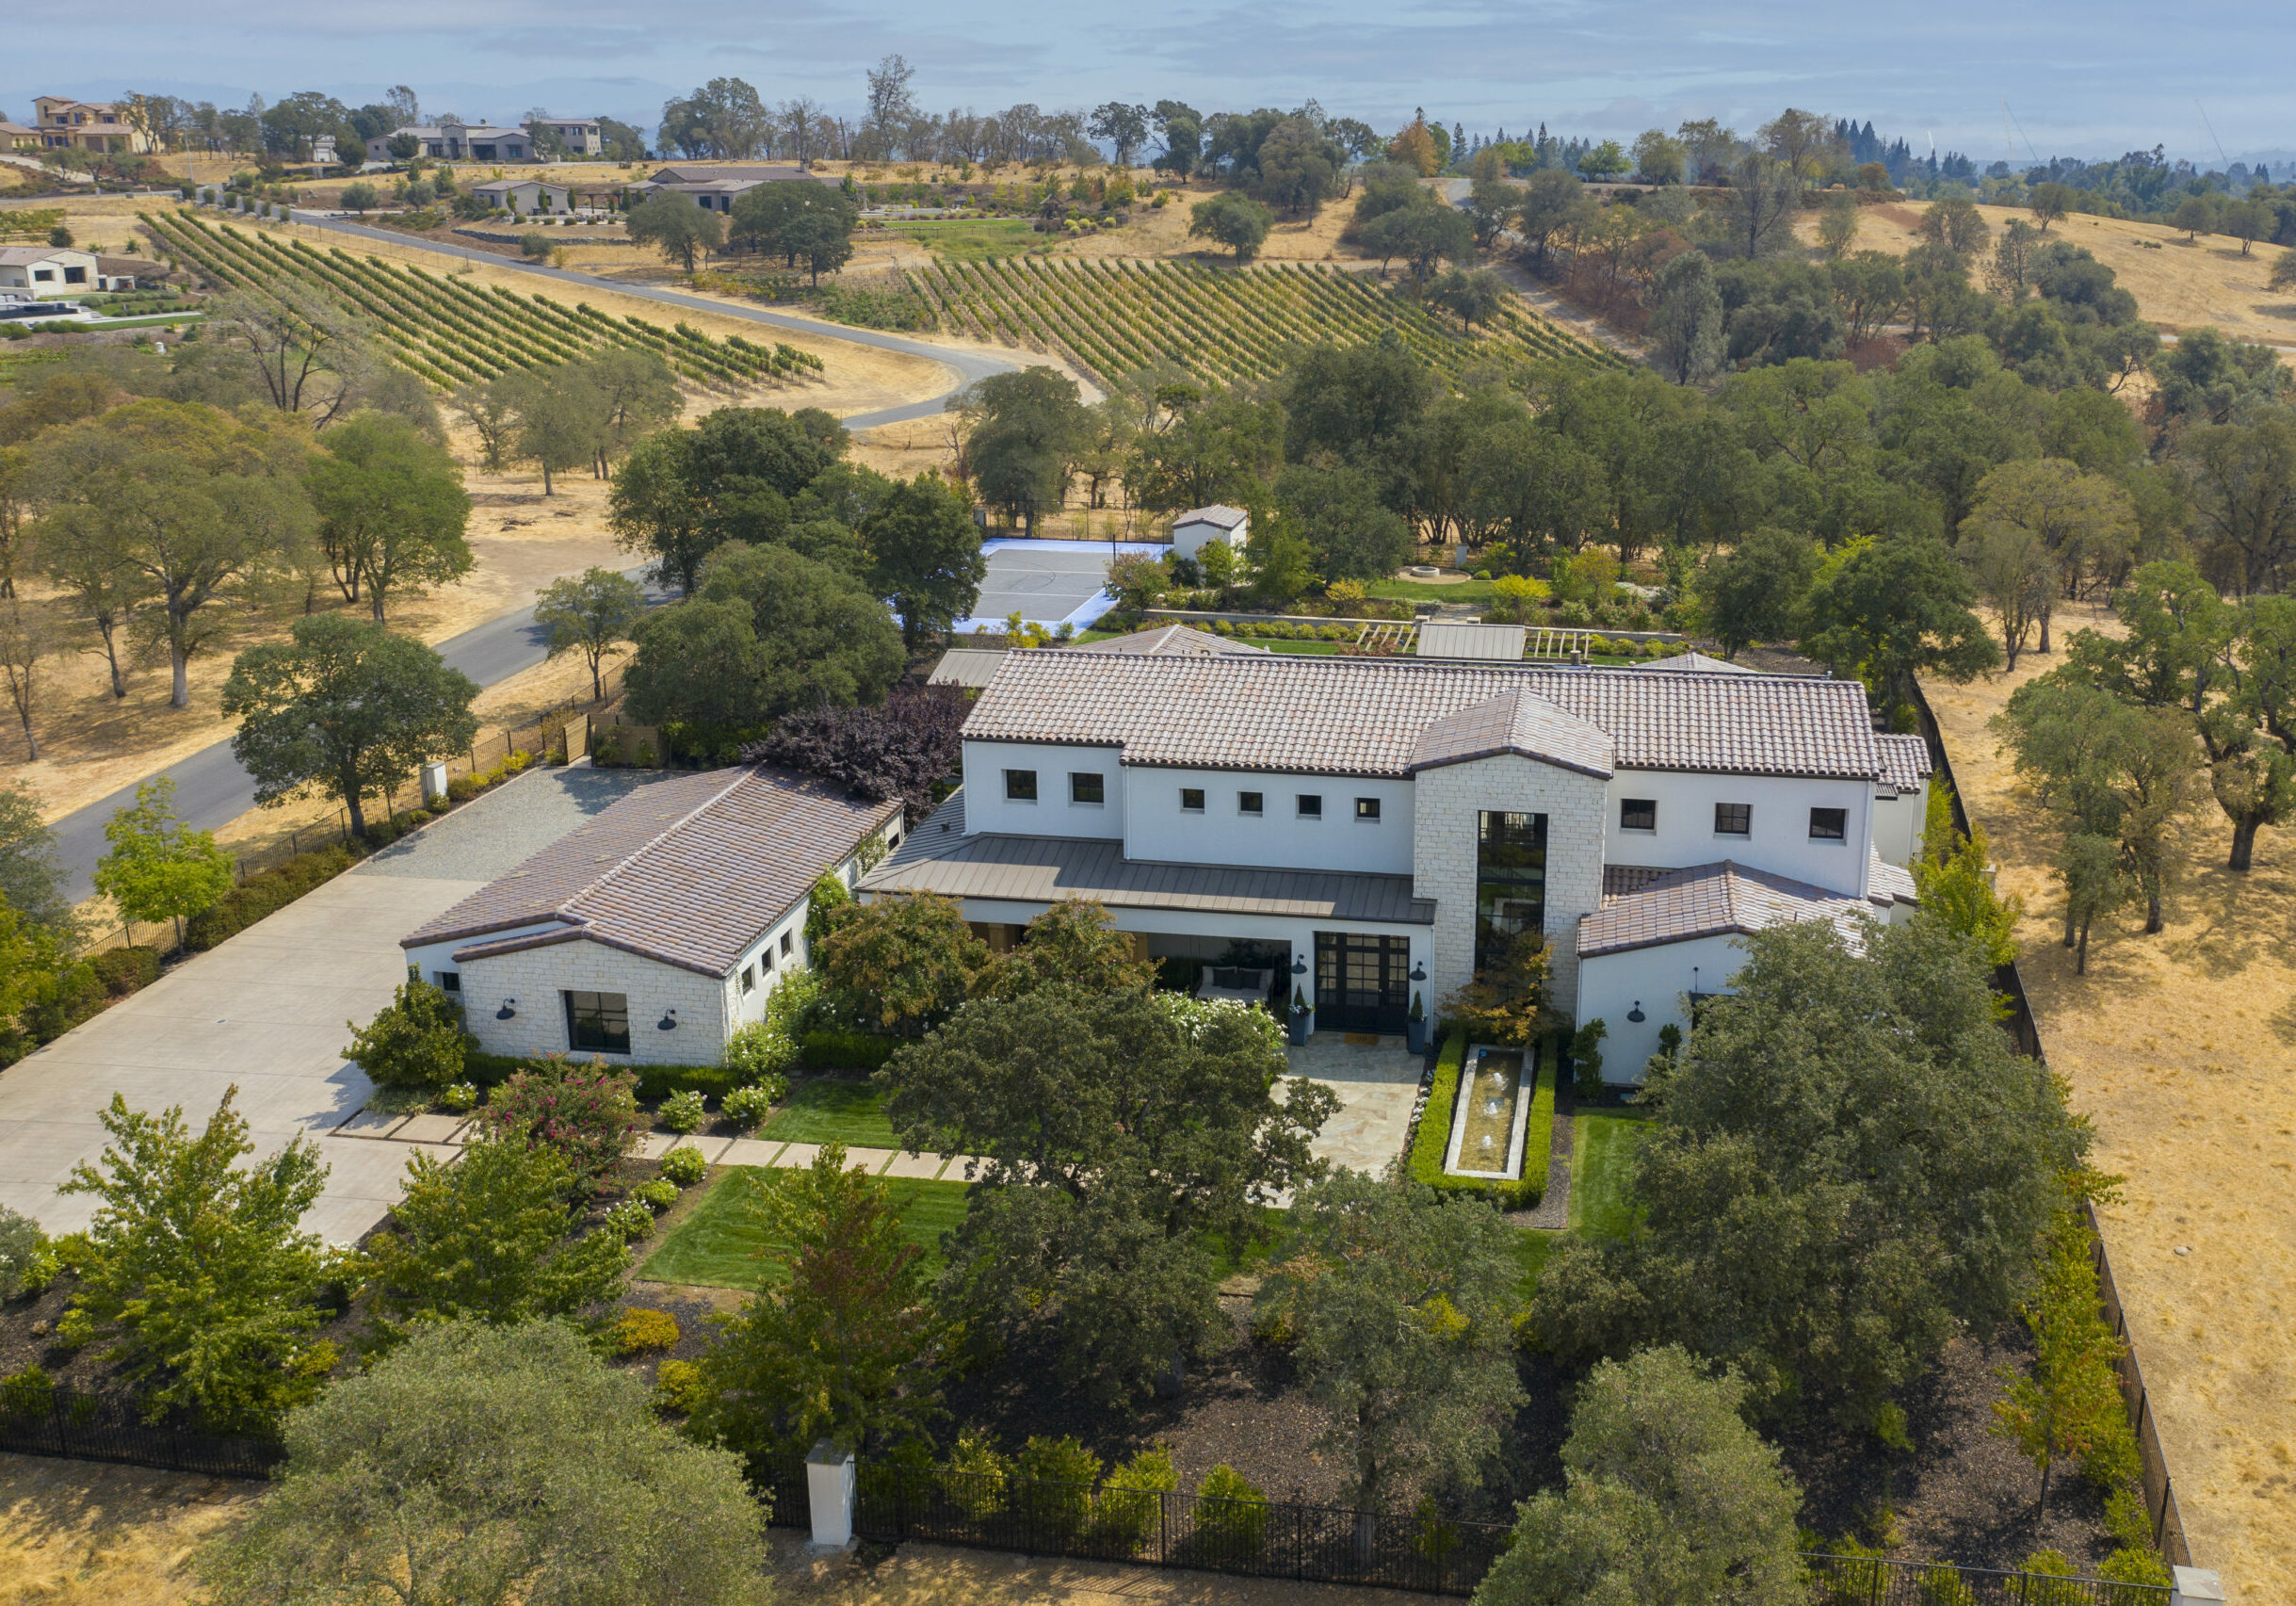 6800 Rutherford Canyon Rd, Loomis, CA 95650
<br/>
$3,850,000